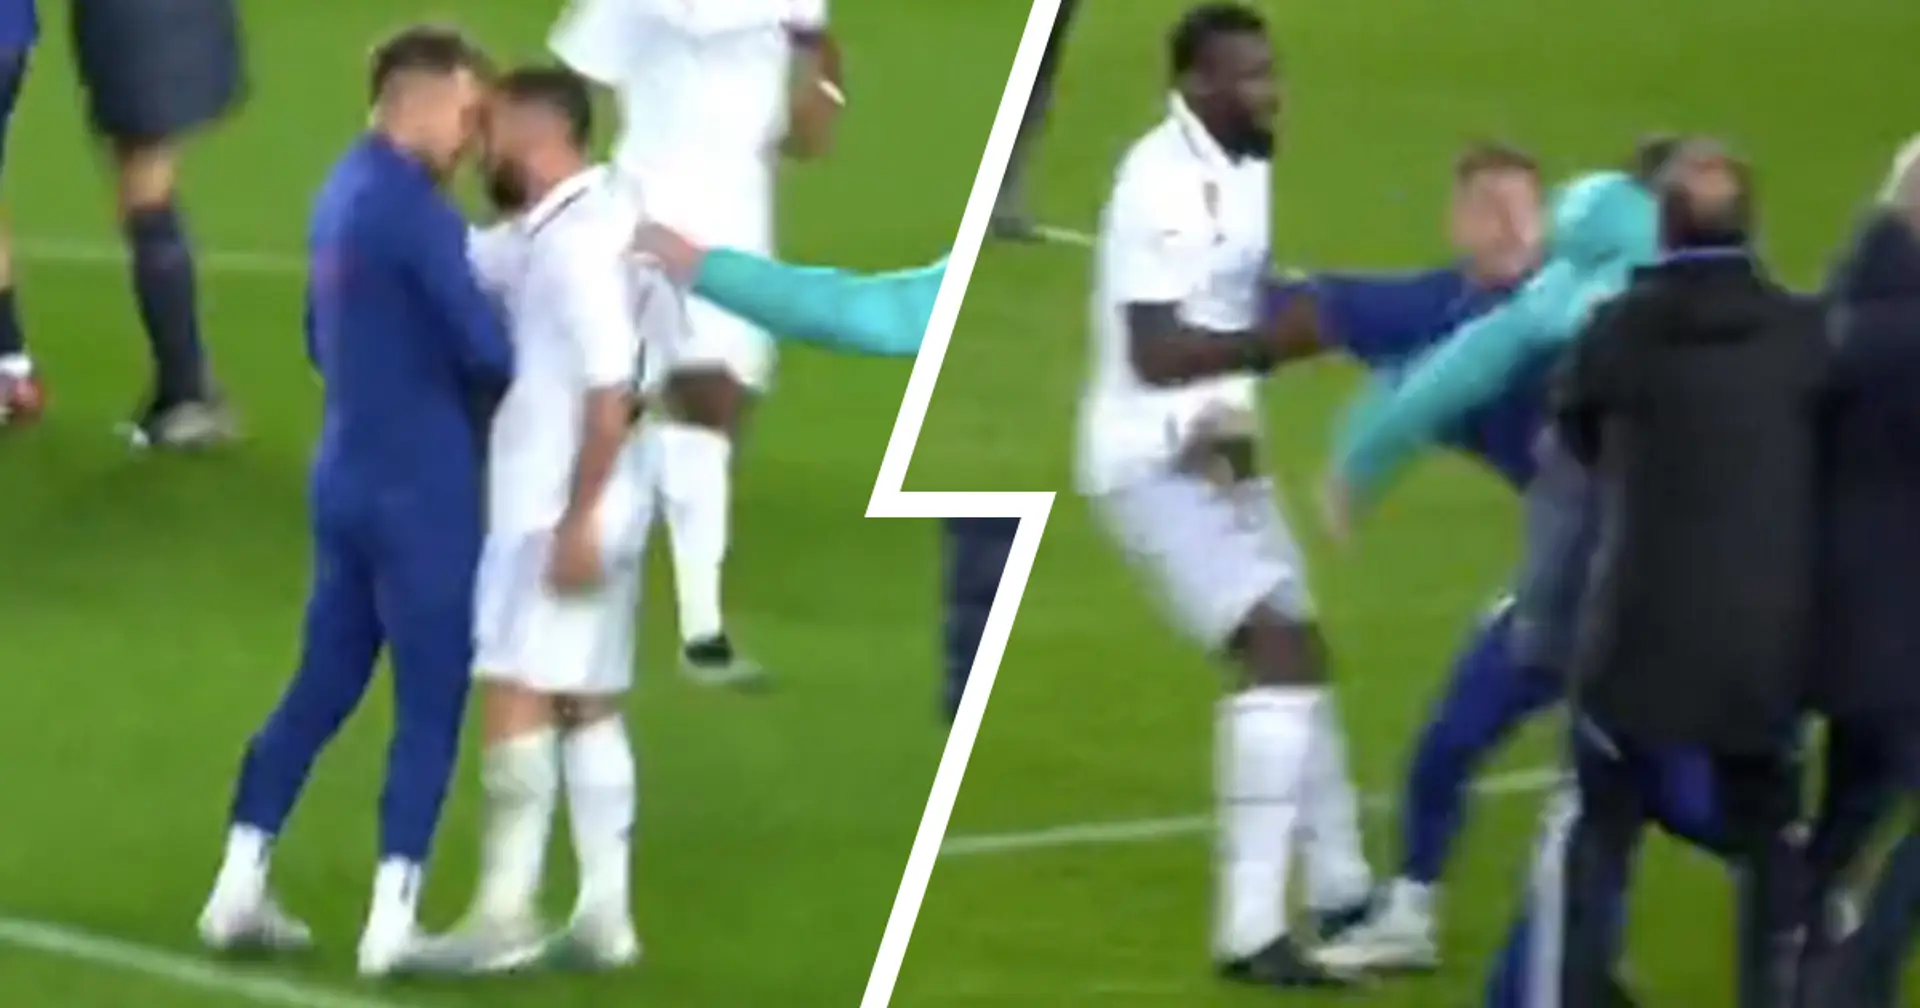 Caught on camera: Barca's third-choice goalie loses temper with Carvajal – what happened